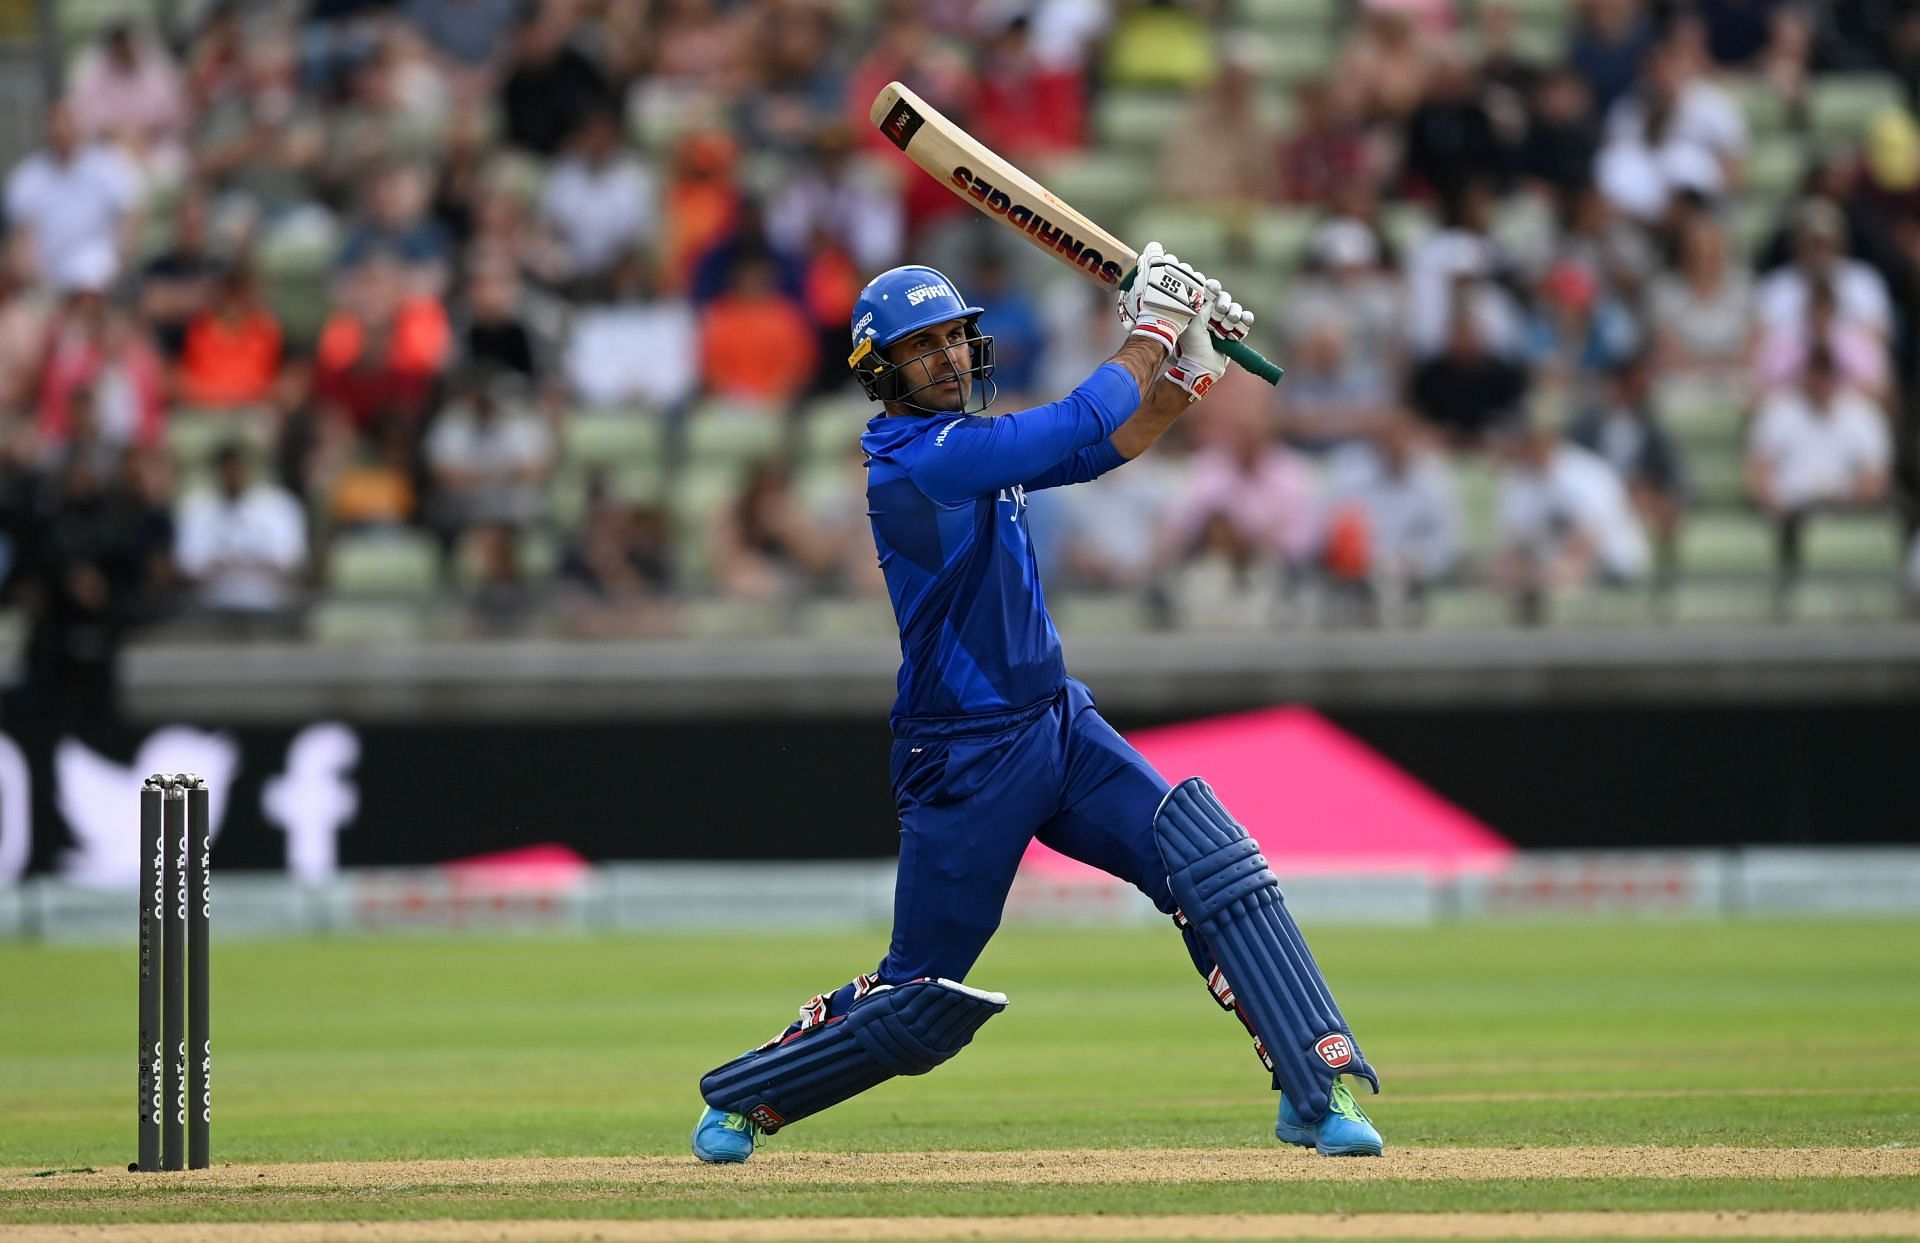 Mohammad Nabi in action during The Hundred.